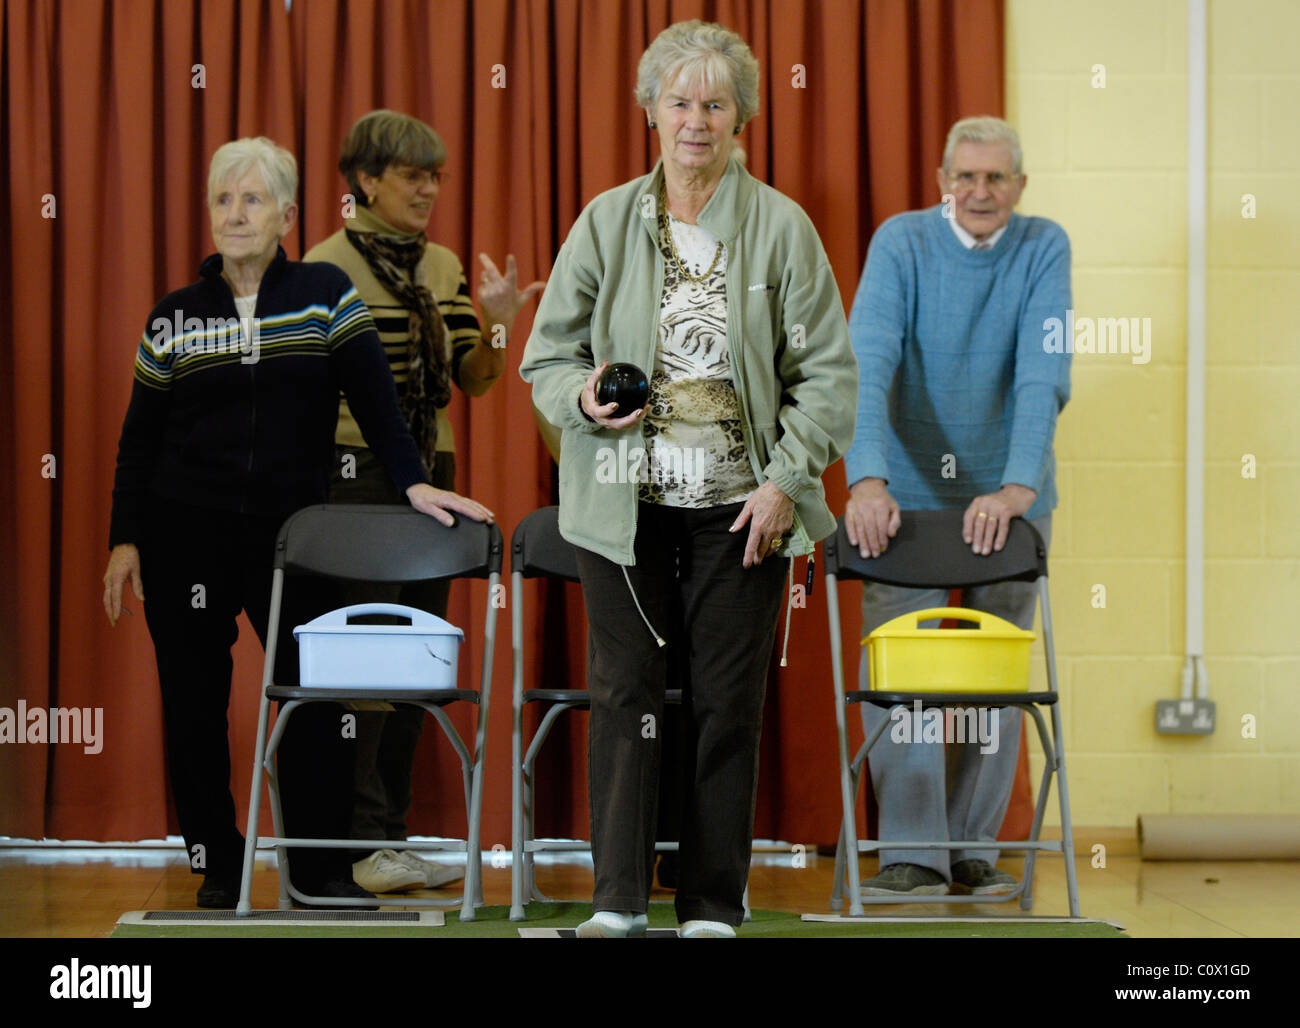 Ederlypeople playing indoor bowls Stock Photo